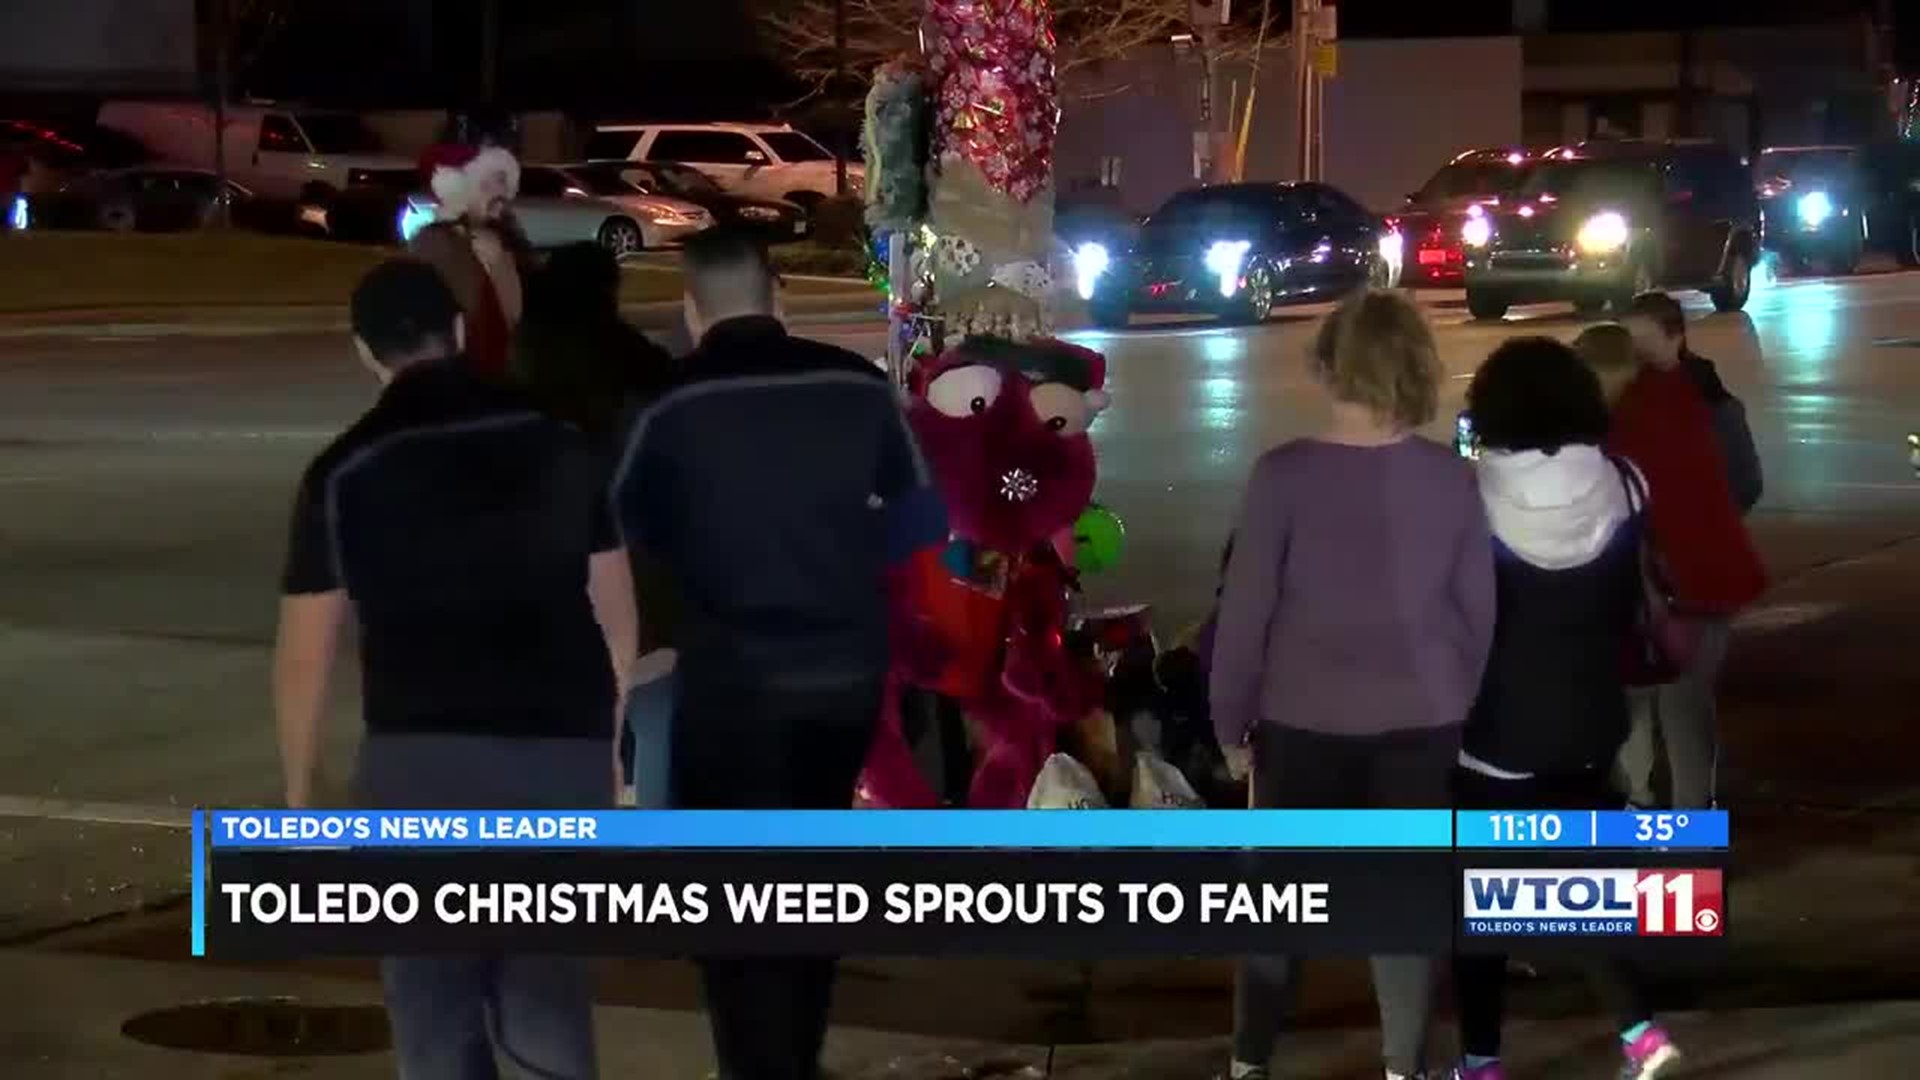 Toledo Christmas Weed inspires t-shirts, donations and proclamation from the mayor